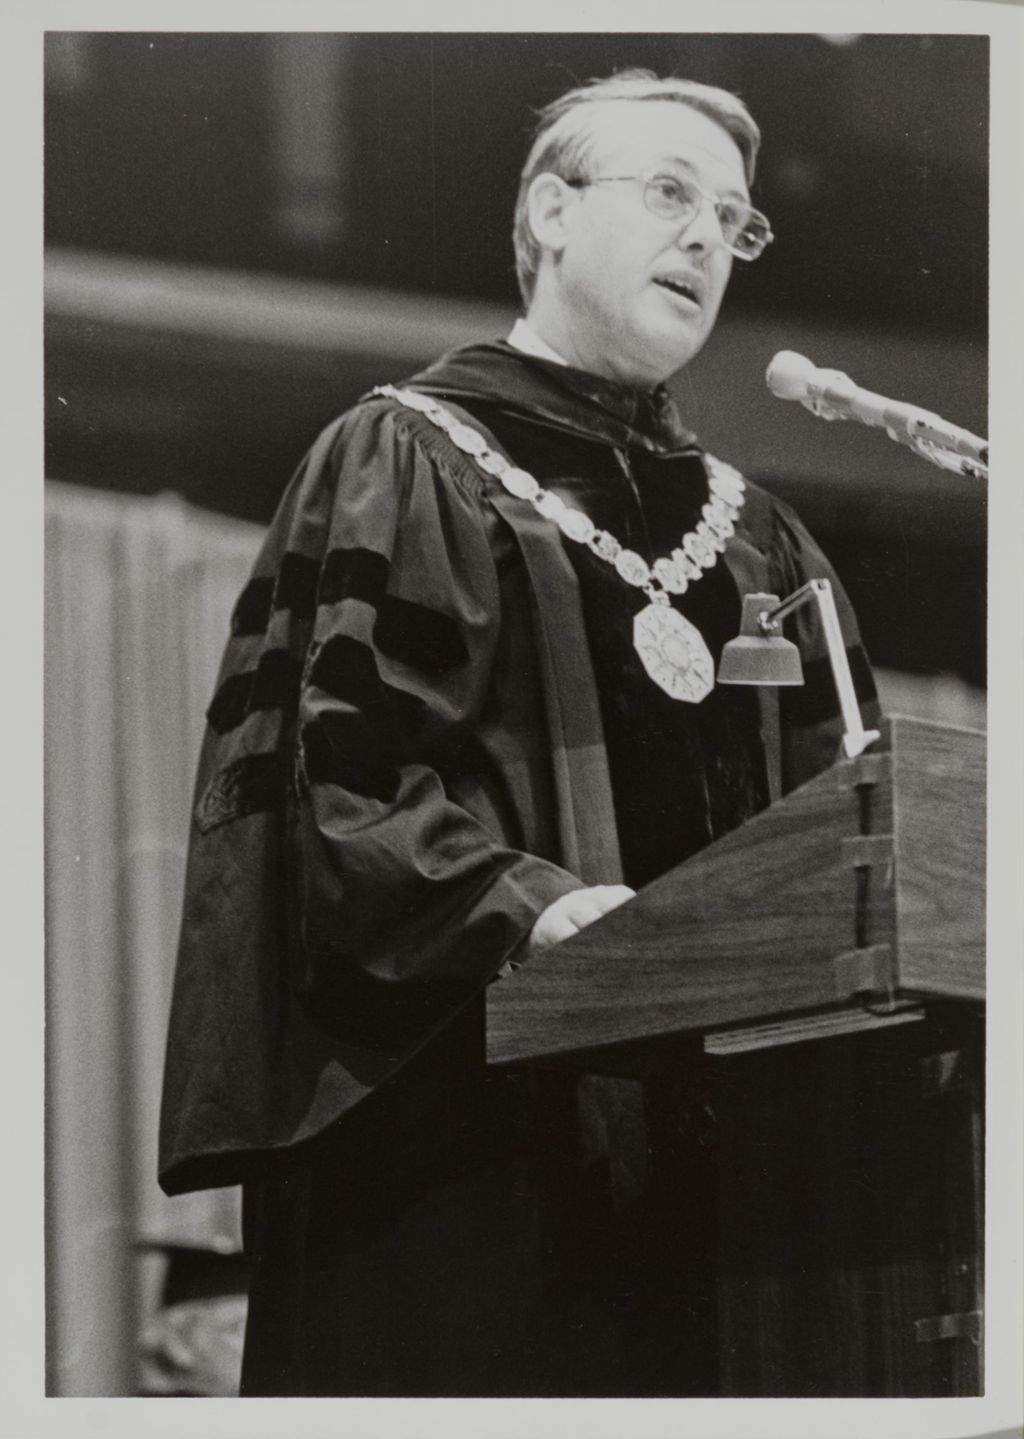 University of Illinois President Stanley O. Ikenberry addressing the audience at graduation